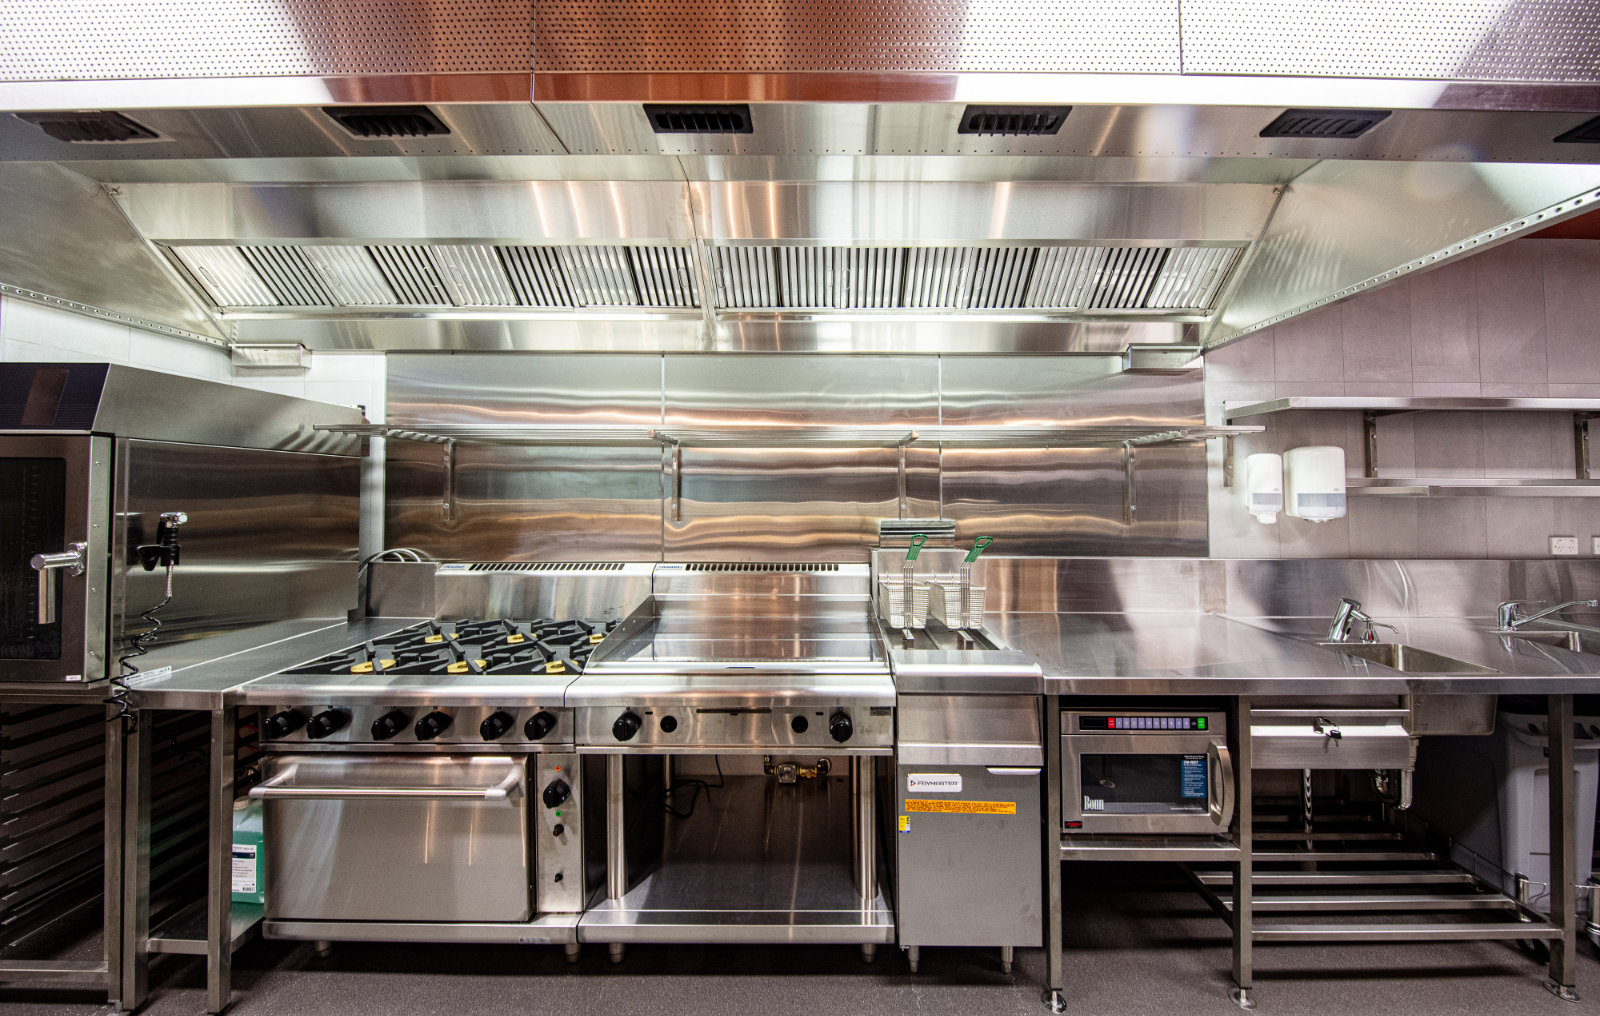 Locations Commercial Kitchen Space For Lease We Kitchens